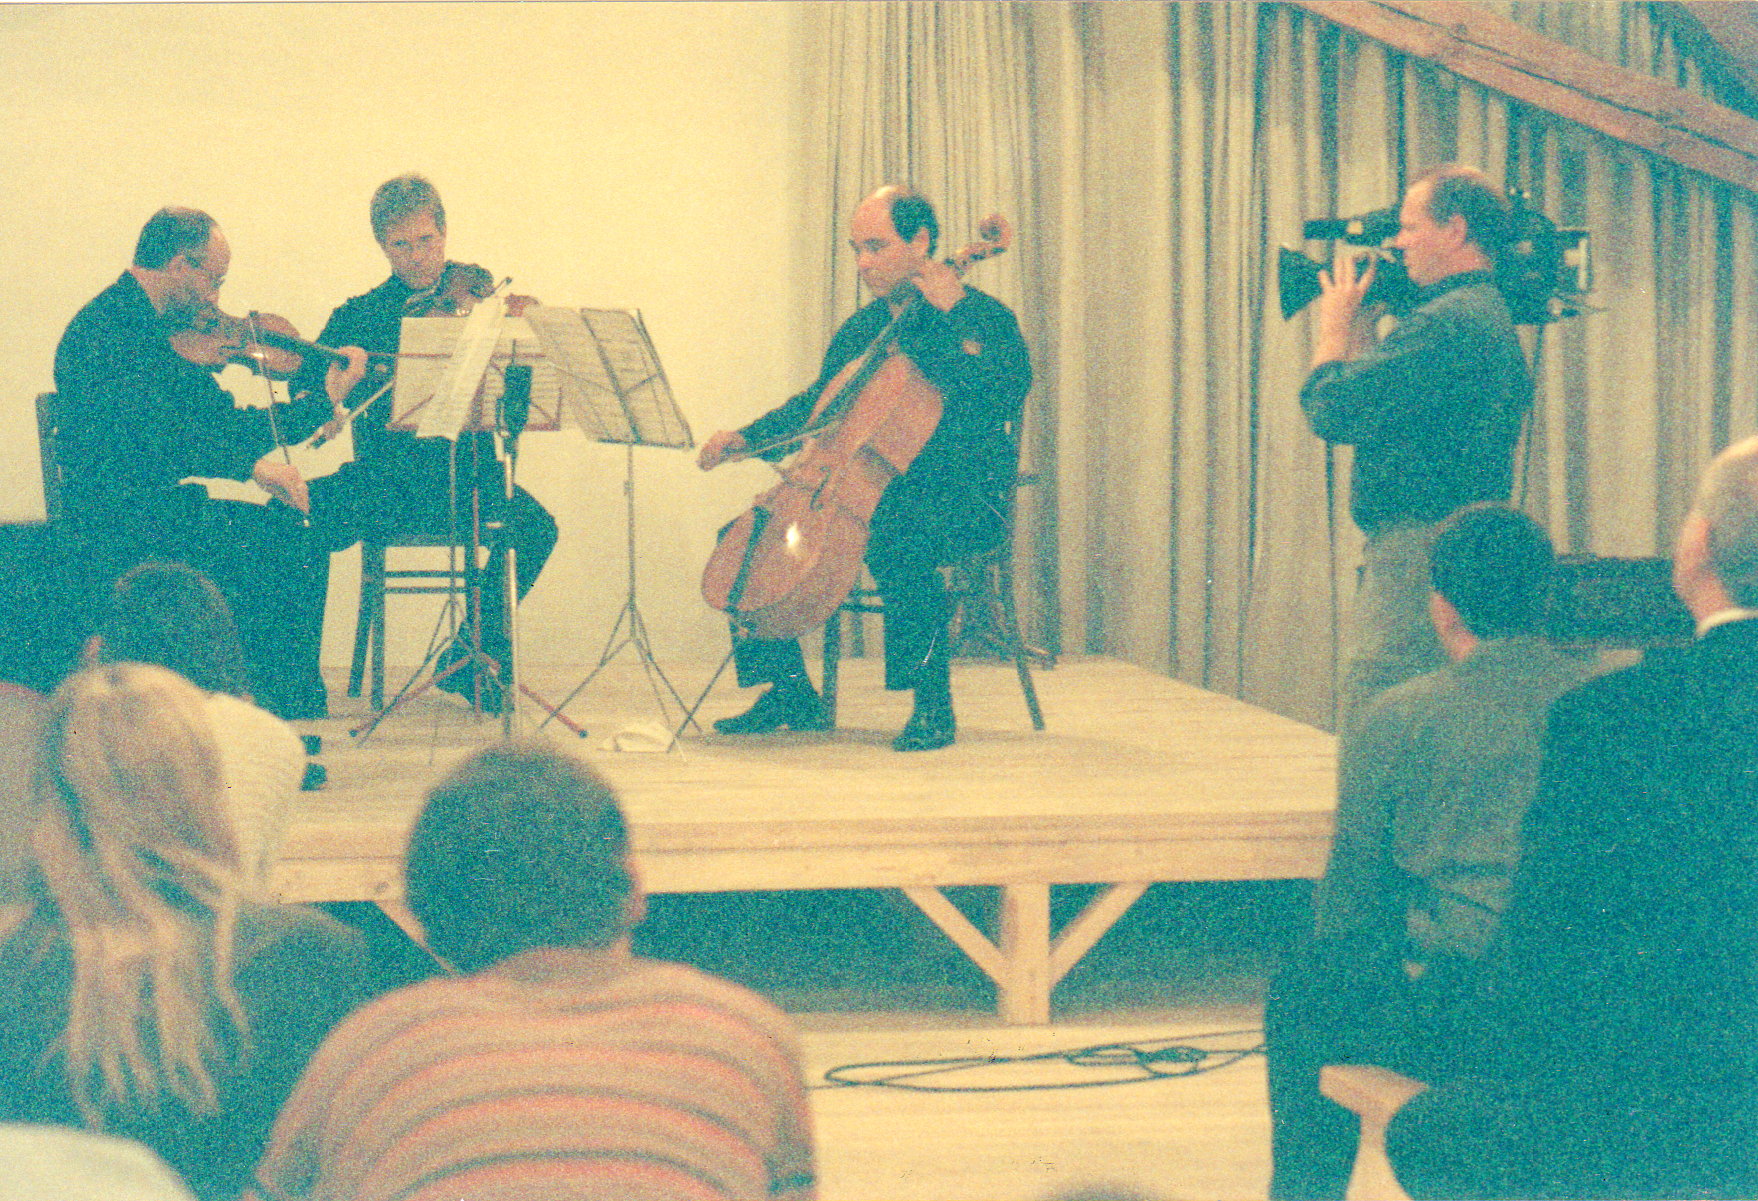 BSO musicians, Attic Theater, Theresienstadt